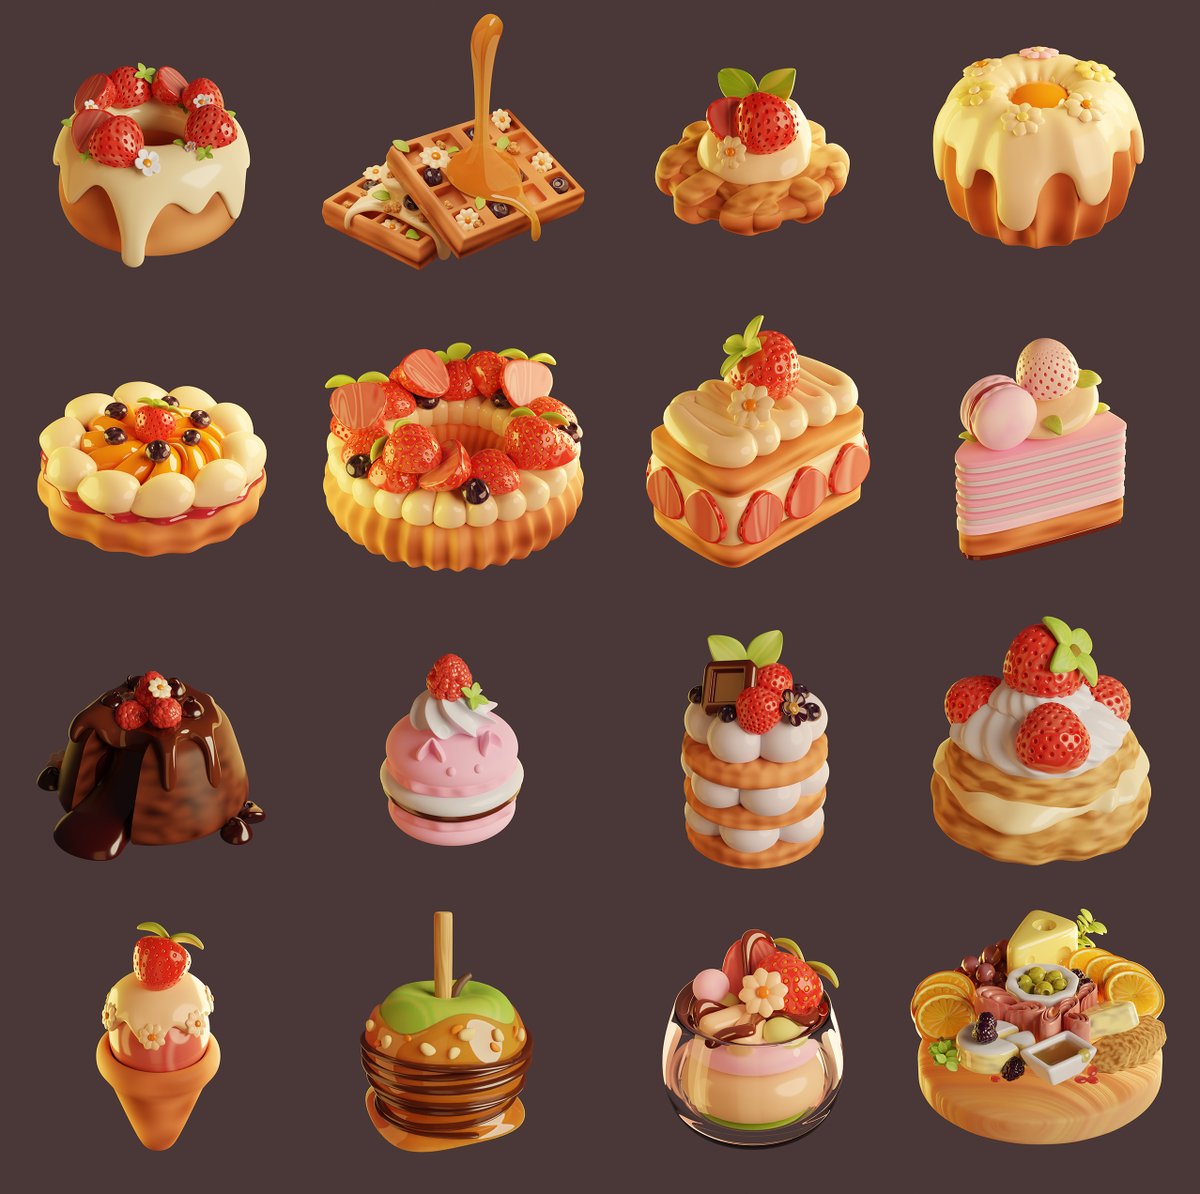 A compilation of some of the dessert that i'd been making so far, it's really satisfying to see how far i've come with blender! 

I love glossy strawberry desserts 🍓✨

.

.

#blender3d #3dart #b3d #dessert #cakes #cakeart #3ddessert #3dcake #strawberry #icecream #cutedessert